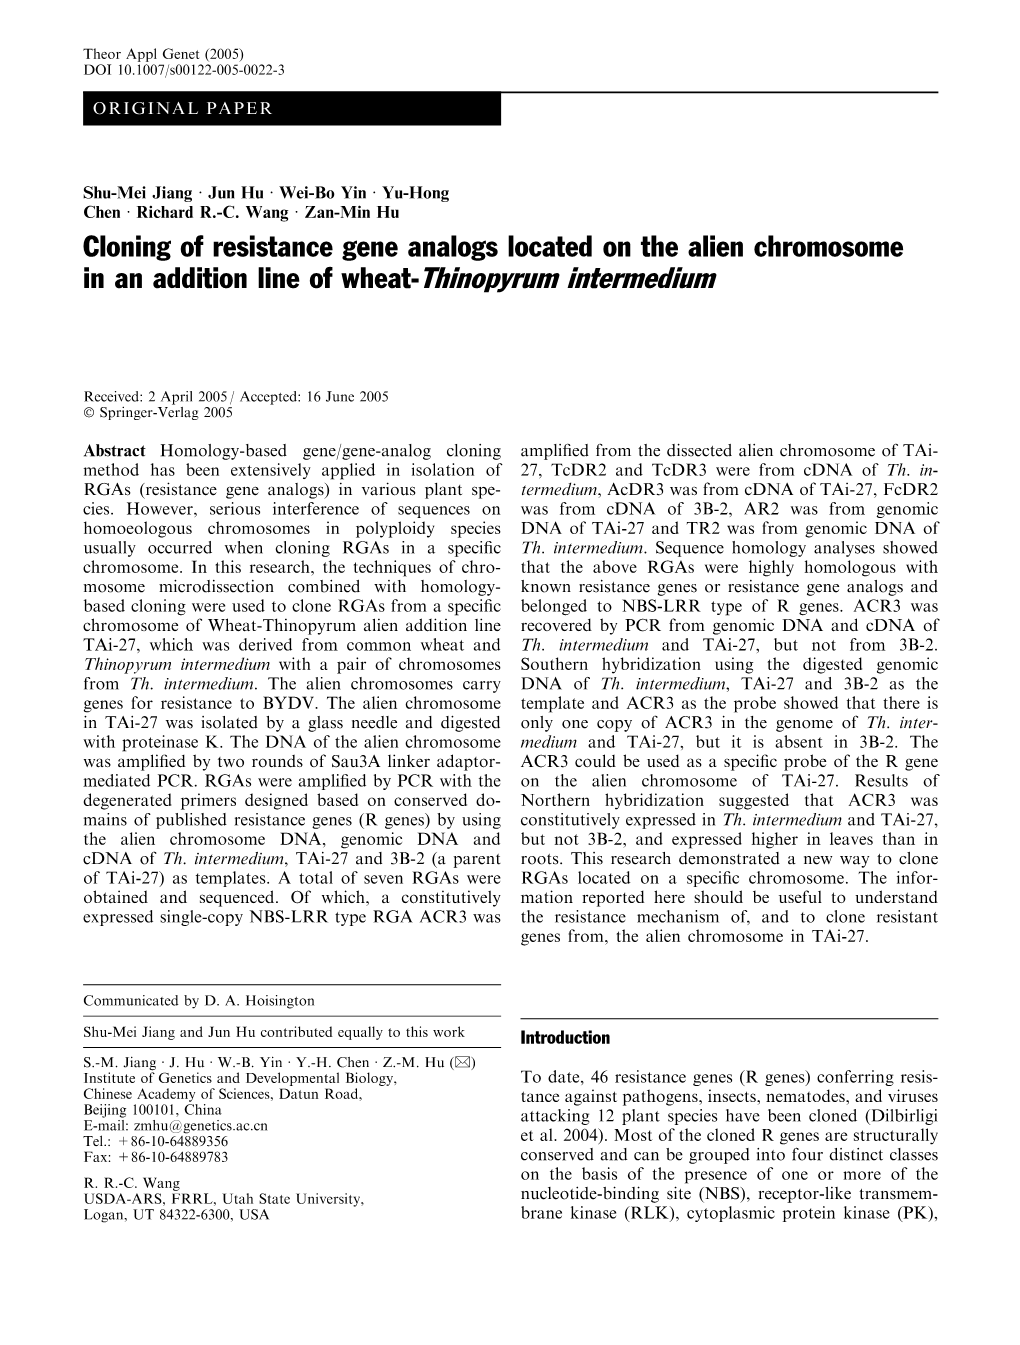 Cloning of Resistance Gene Analogs Located on the Alien Chromosome in an Addition Line of Wheat-Thinopyrum Intermedium